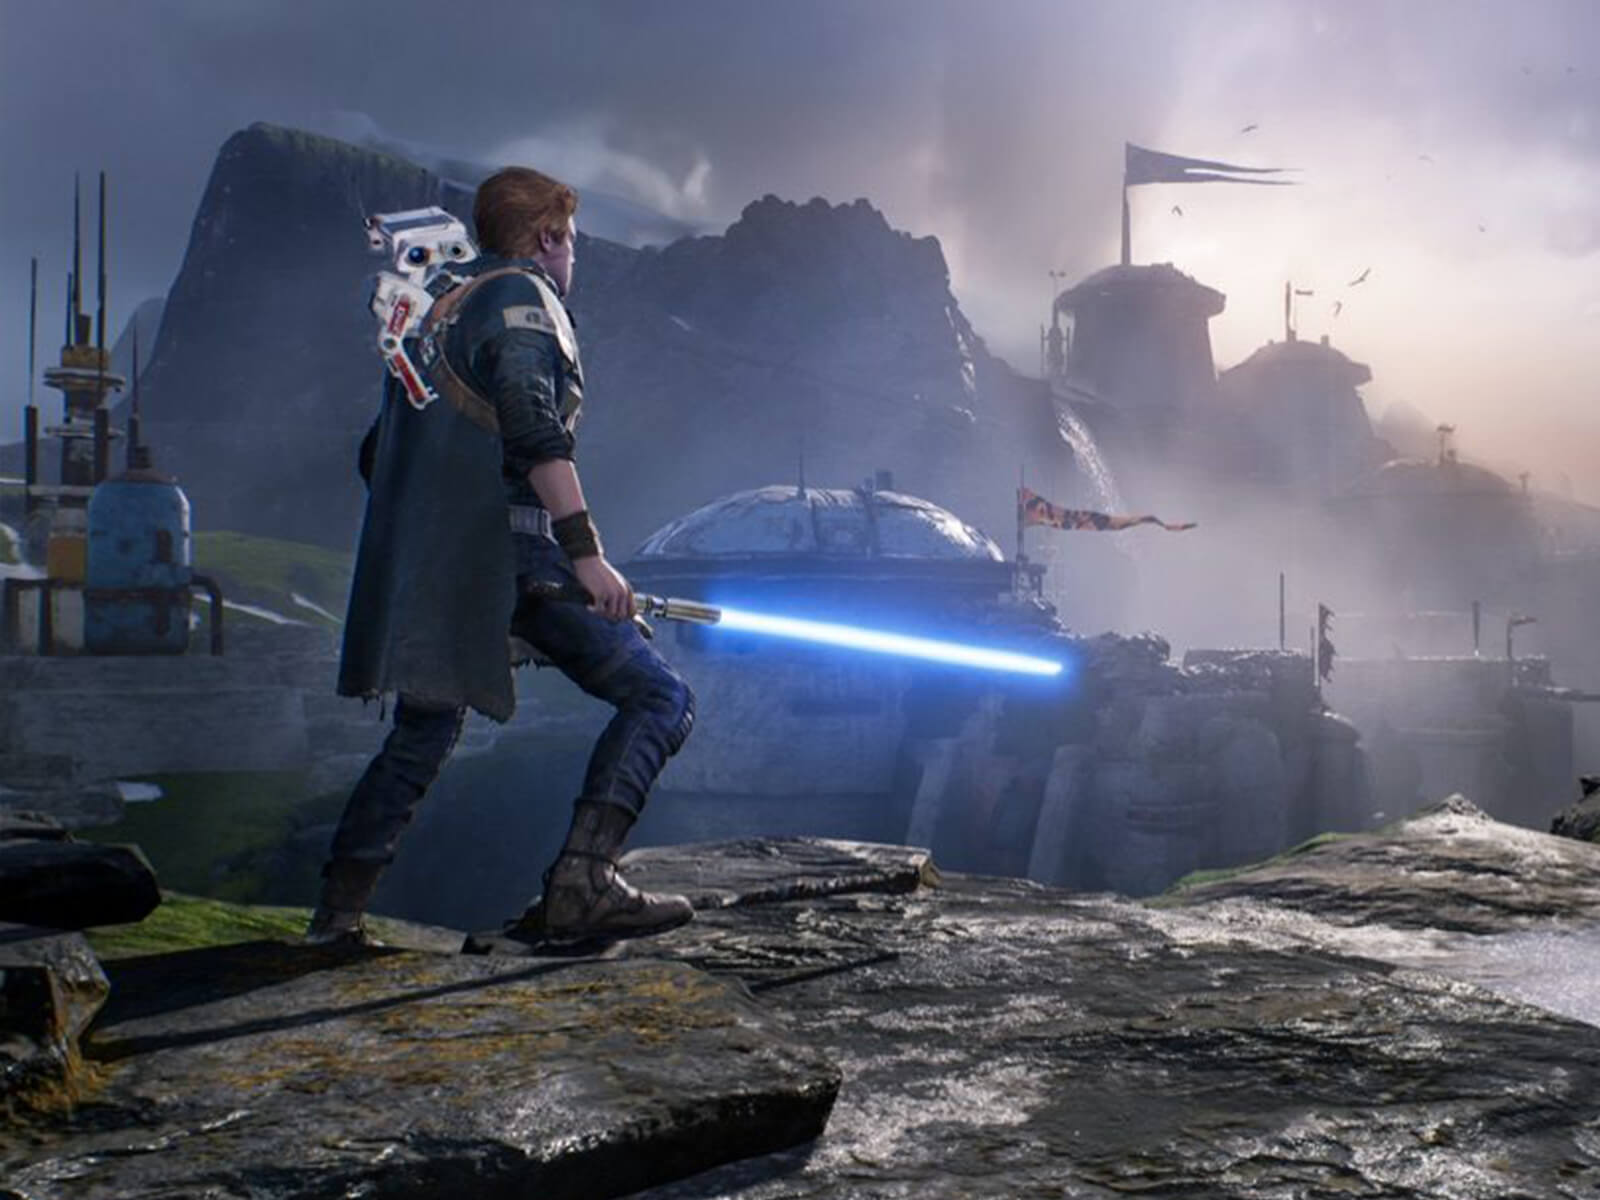 Star Wars Jedi: Fallen Order’s hero, Cal Kestis, wields his lightsaber and looks out at a rocky landscape while a small droid rides on his back.